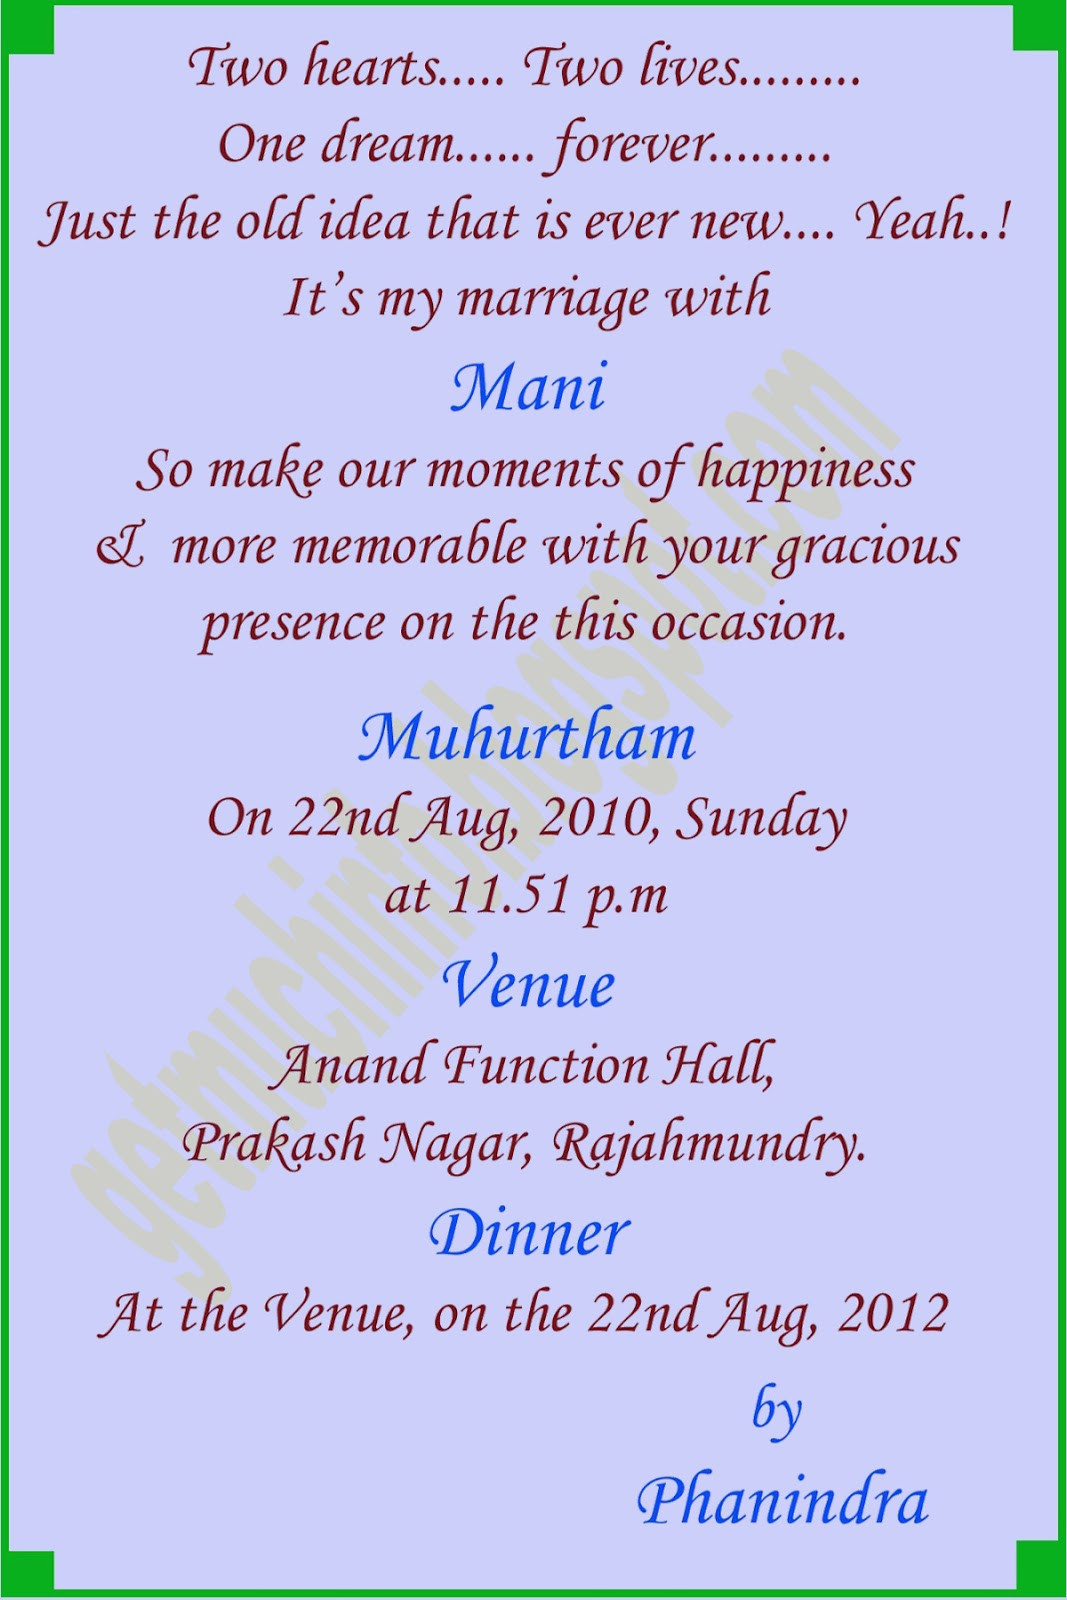 Marriage Quotes For Wedding Cards
 MARRIAGE QUOTES ON WEDDING INVITATION CARDS IN HINDI image